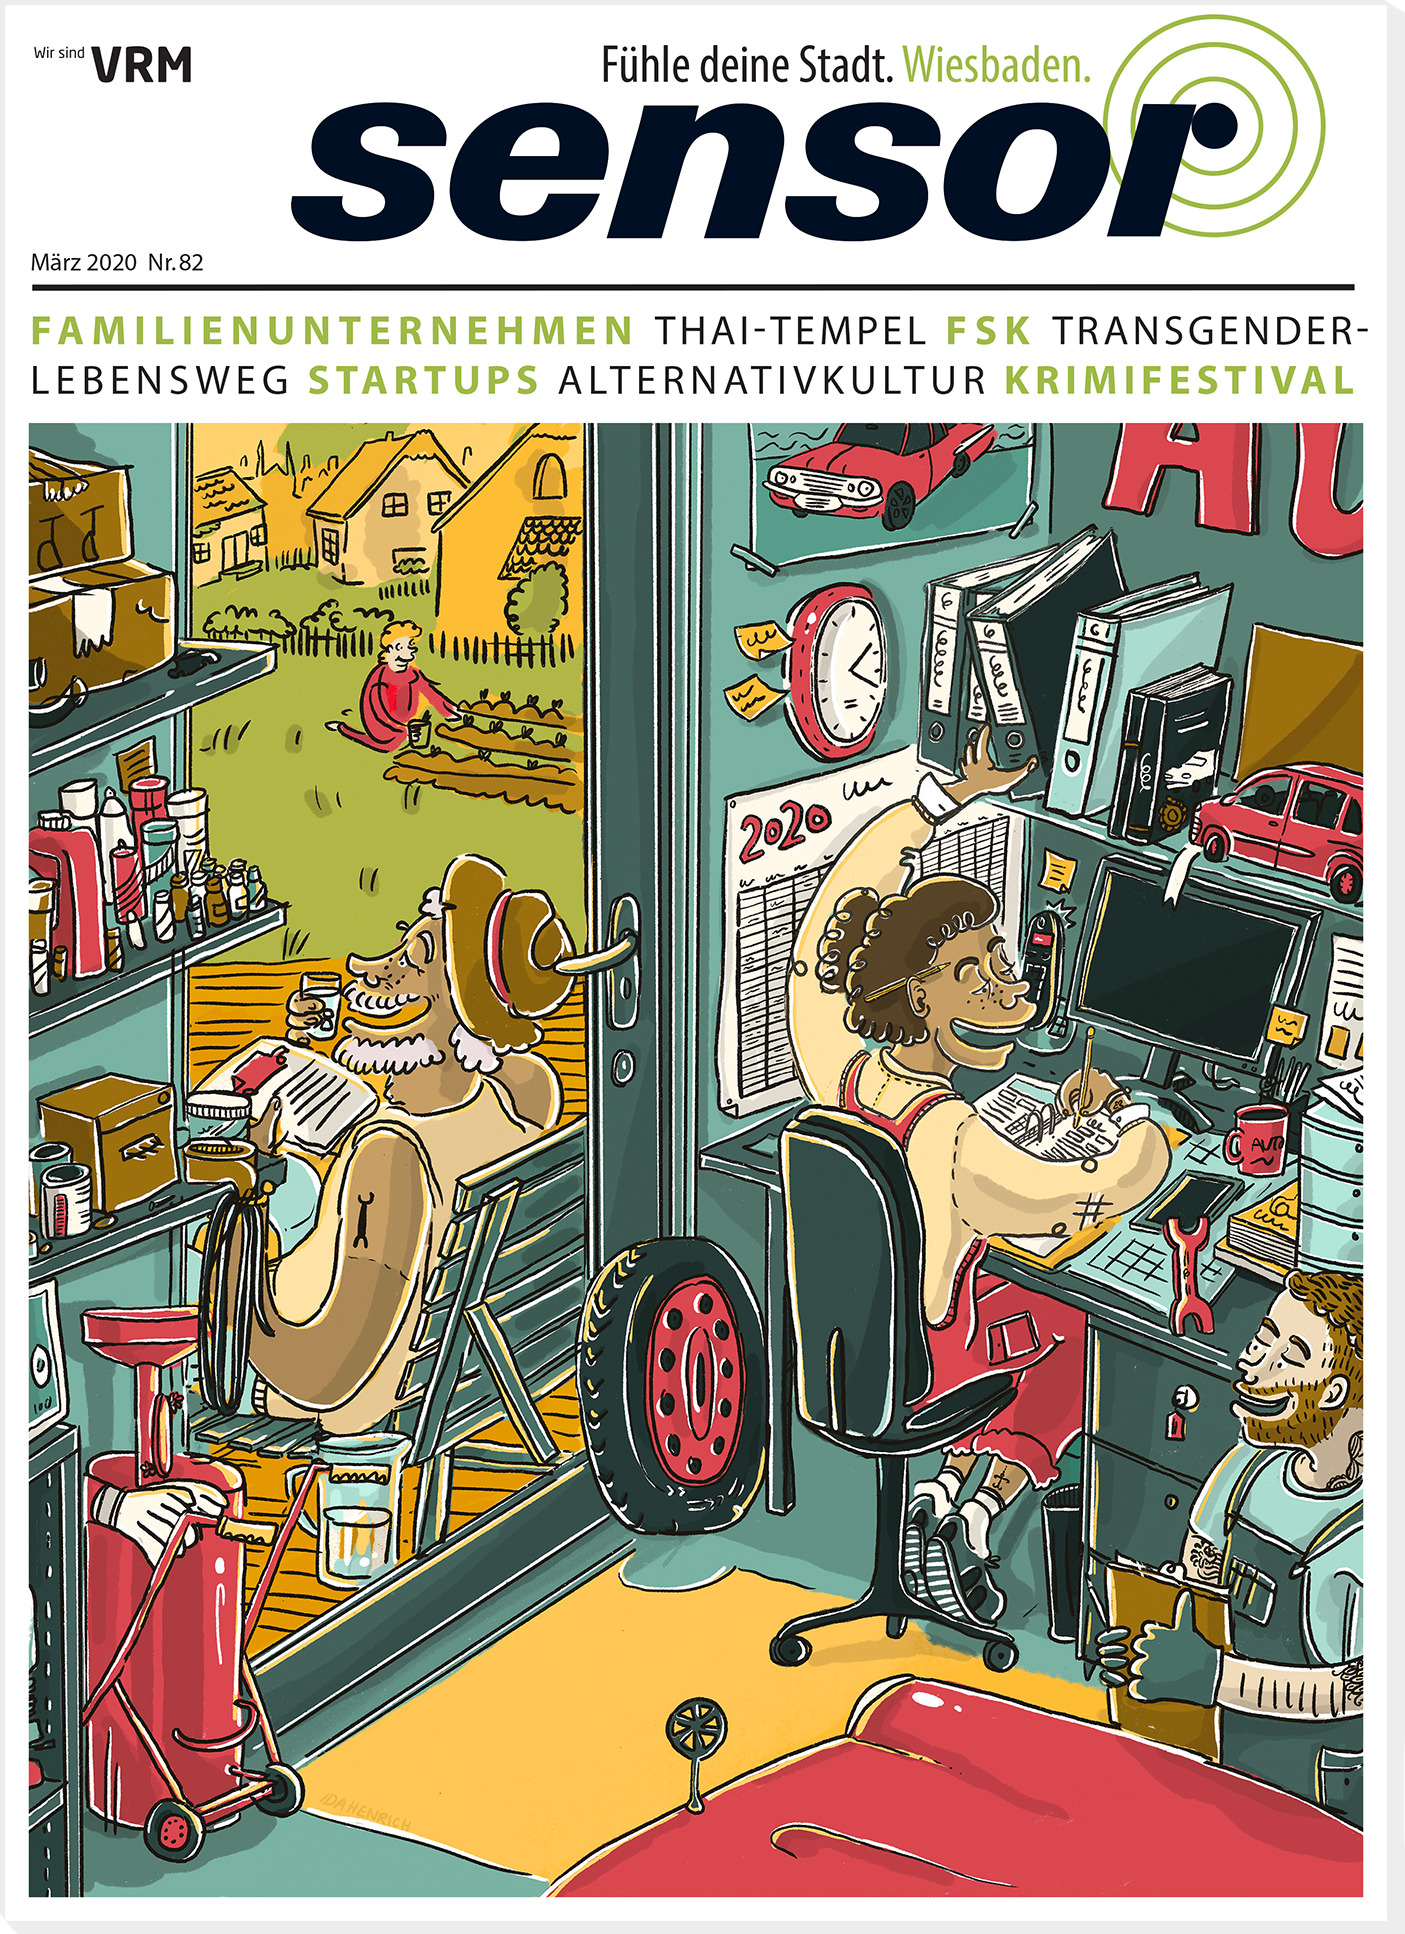 Image of a car garage with staff and family. Cover | Artwork ©Ida Henrich | Mar 19